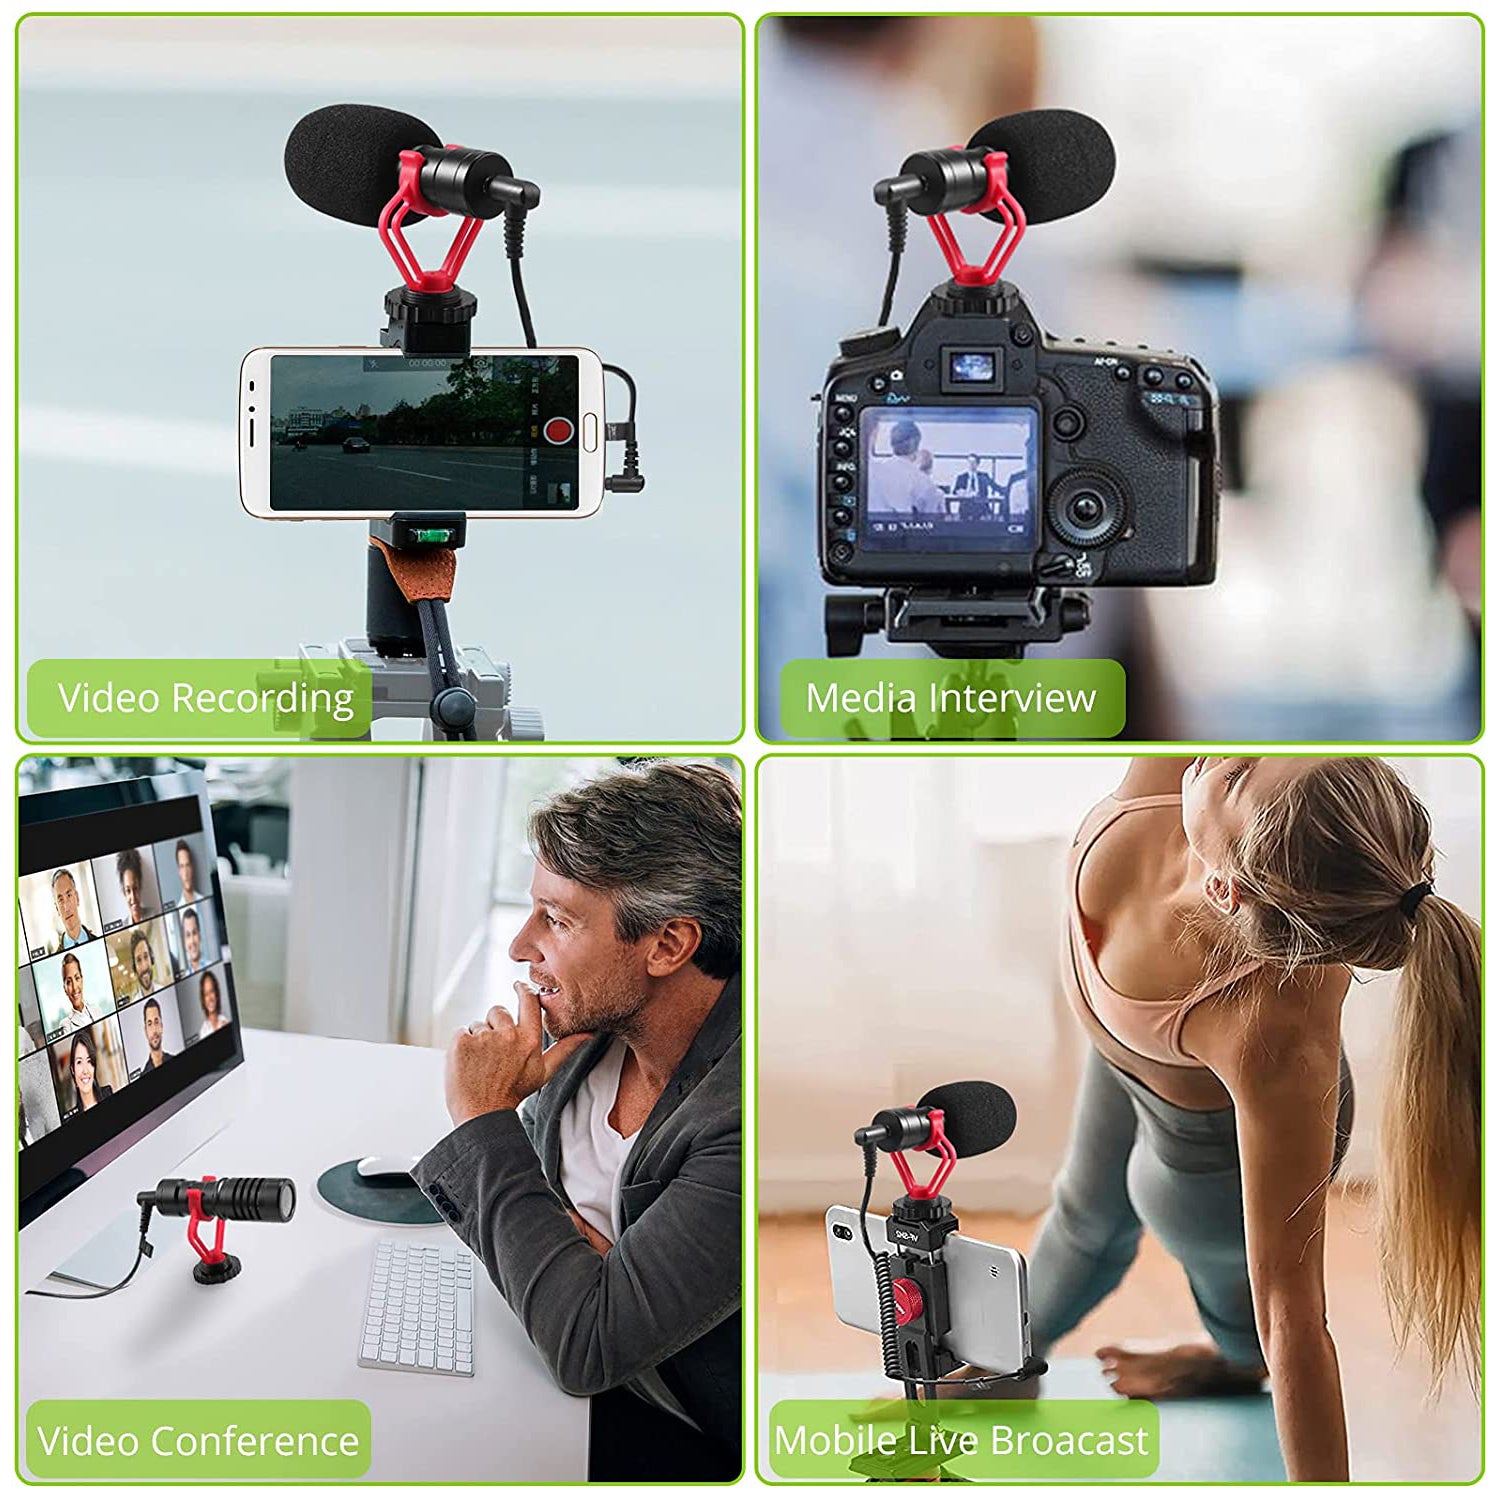 LiNKFOR Camera Microphone with Shock Mount Video Microphone